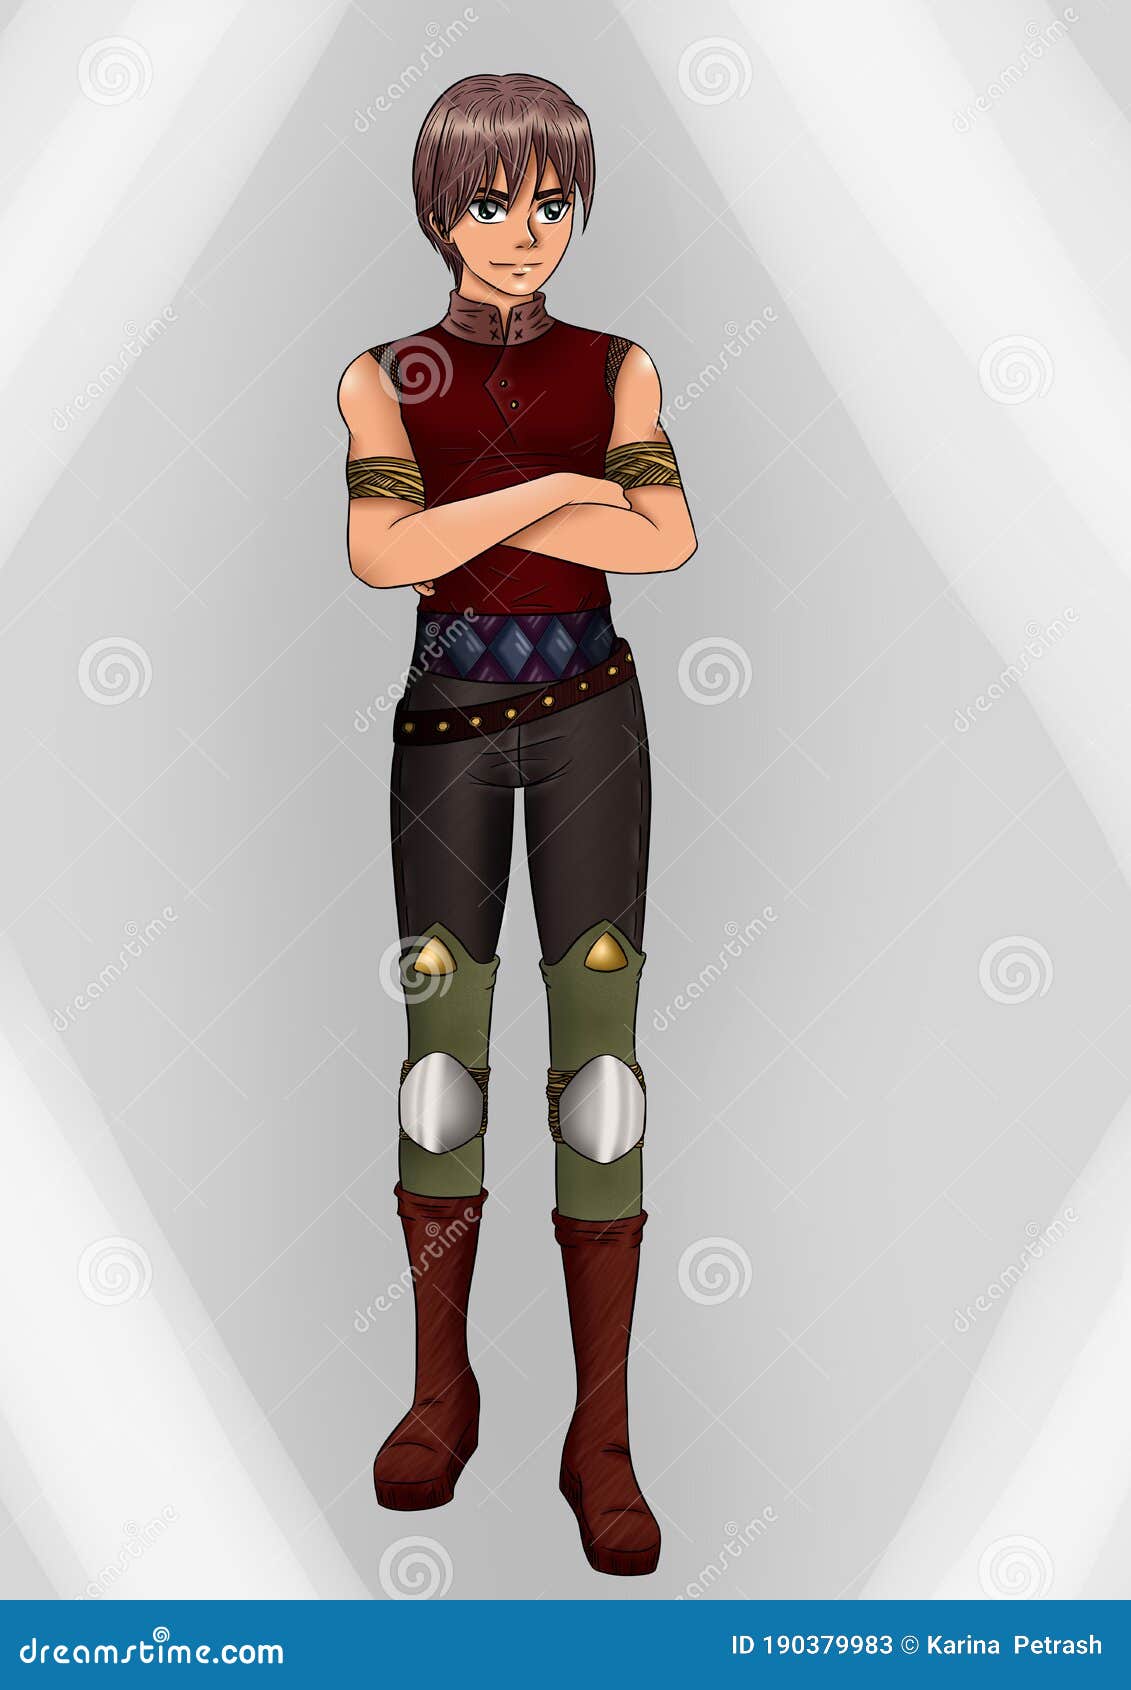 Featured image of post Medieval Anime Boy Clothes Image of 35 of the most stylish anime character outfits